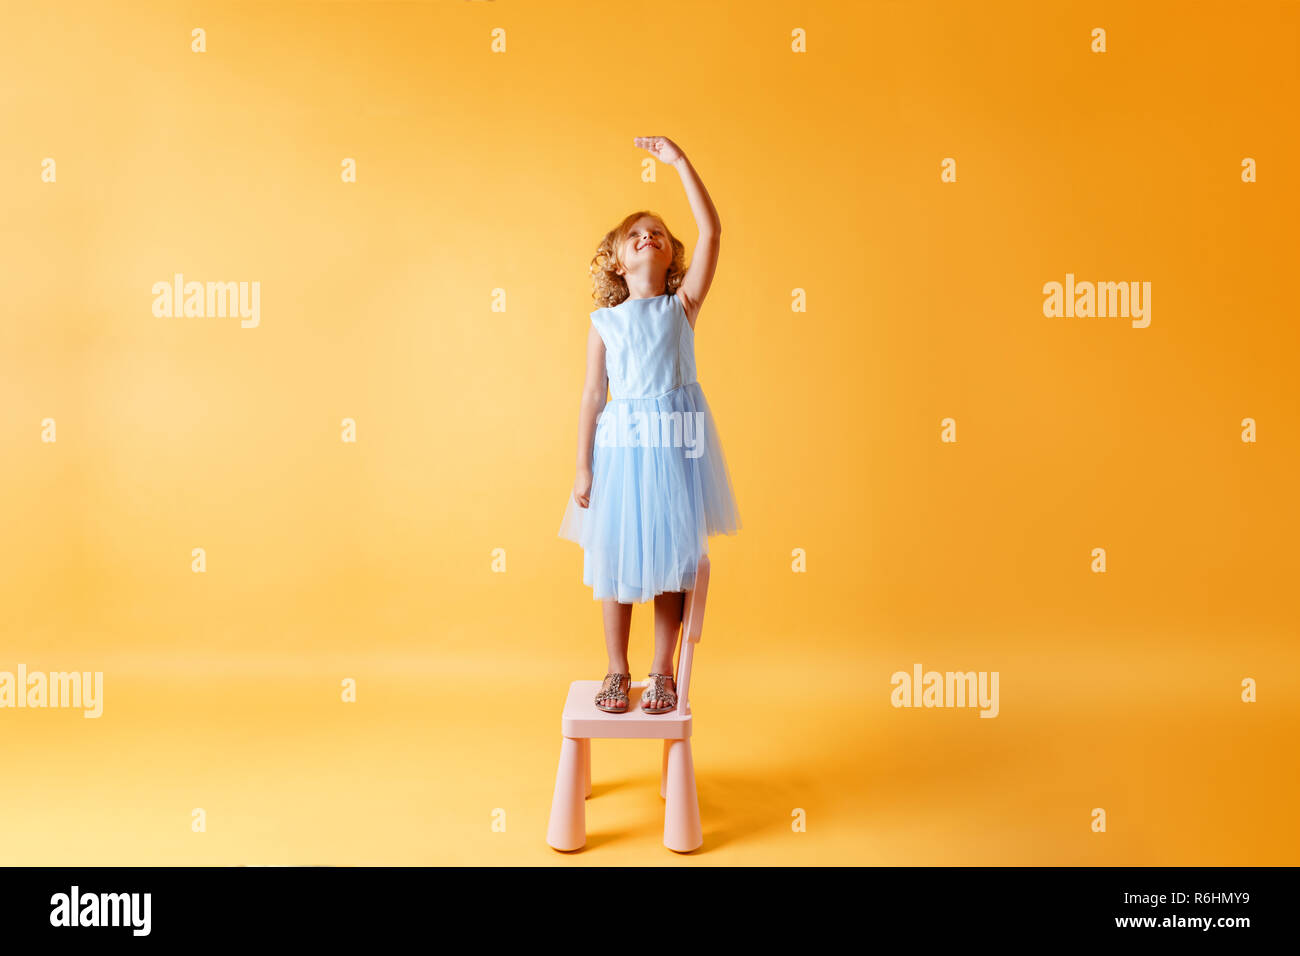 A little child girl in a blue dress is standing on a chair and measures her height against the background of the yellow wall. Concept of development,  Stock Photo